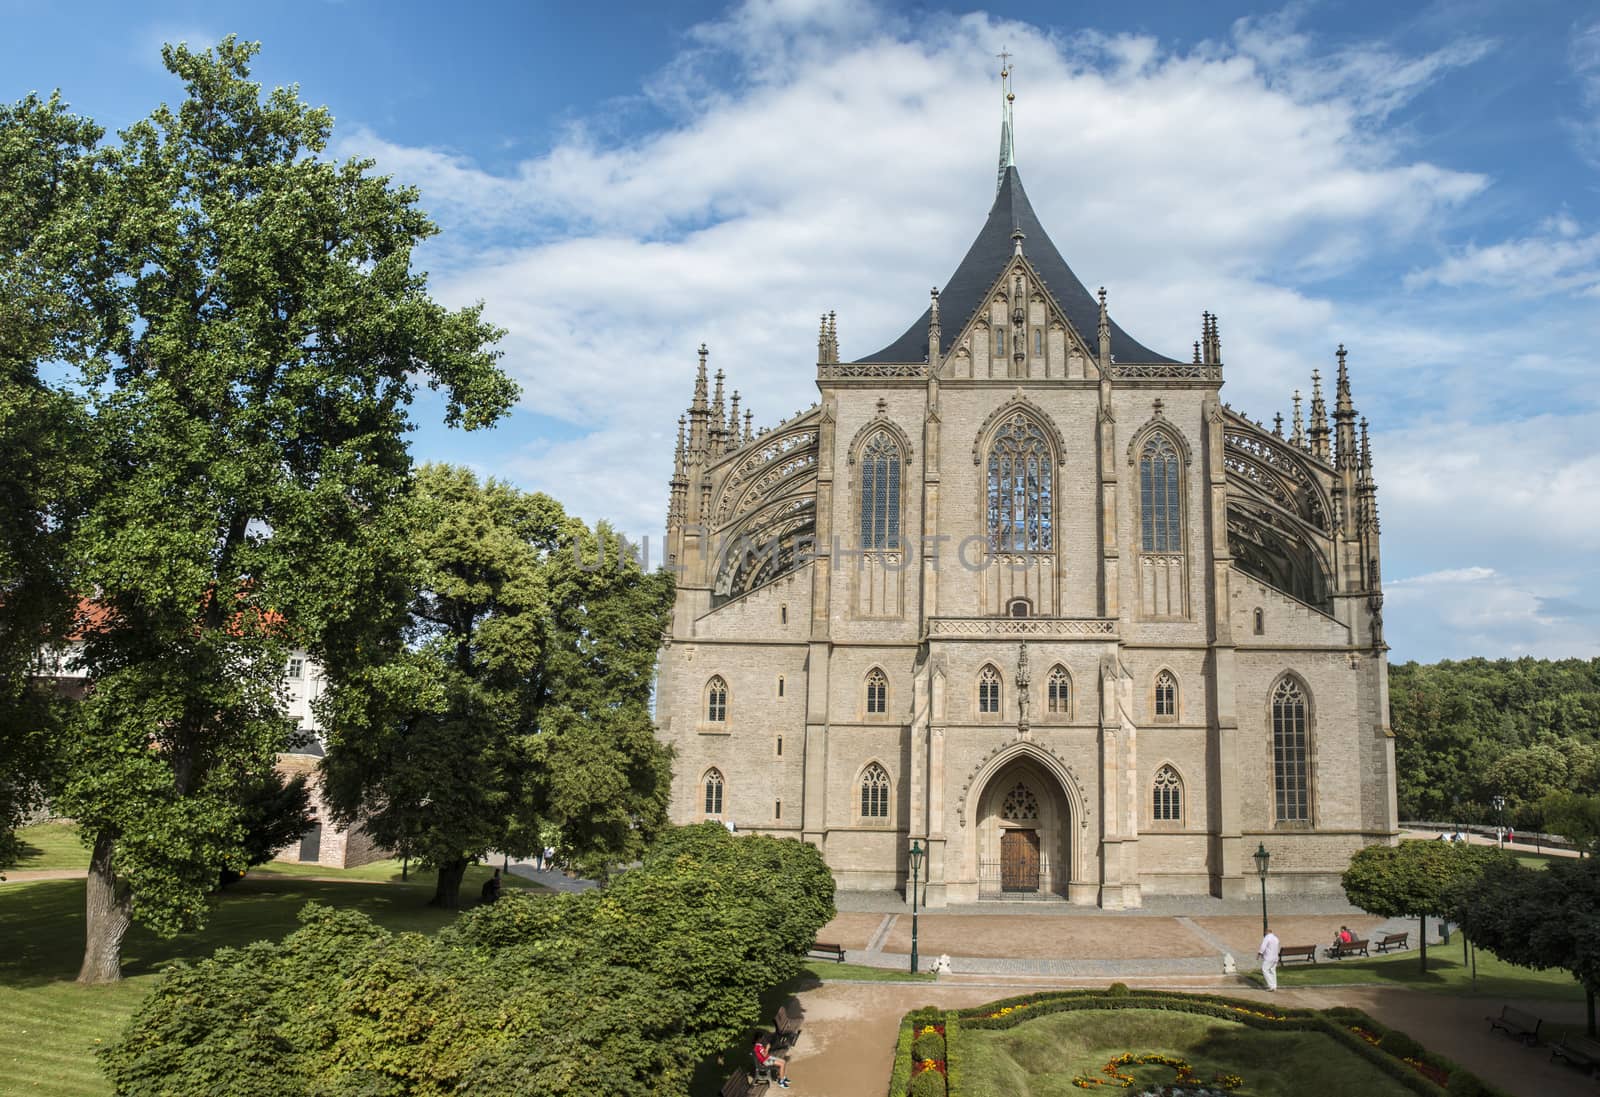 Saint Barbara's Church in the city of Kutna Hora, Czech Republic. Old gothic cathedral landmark.